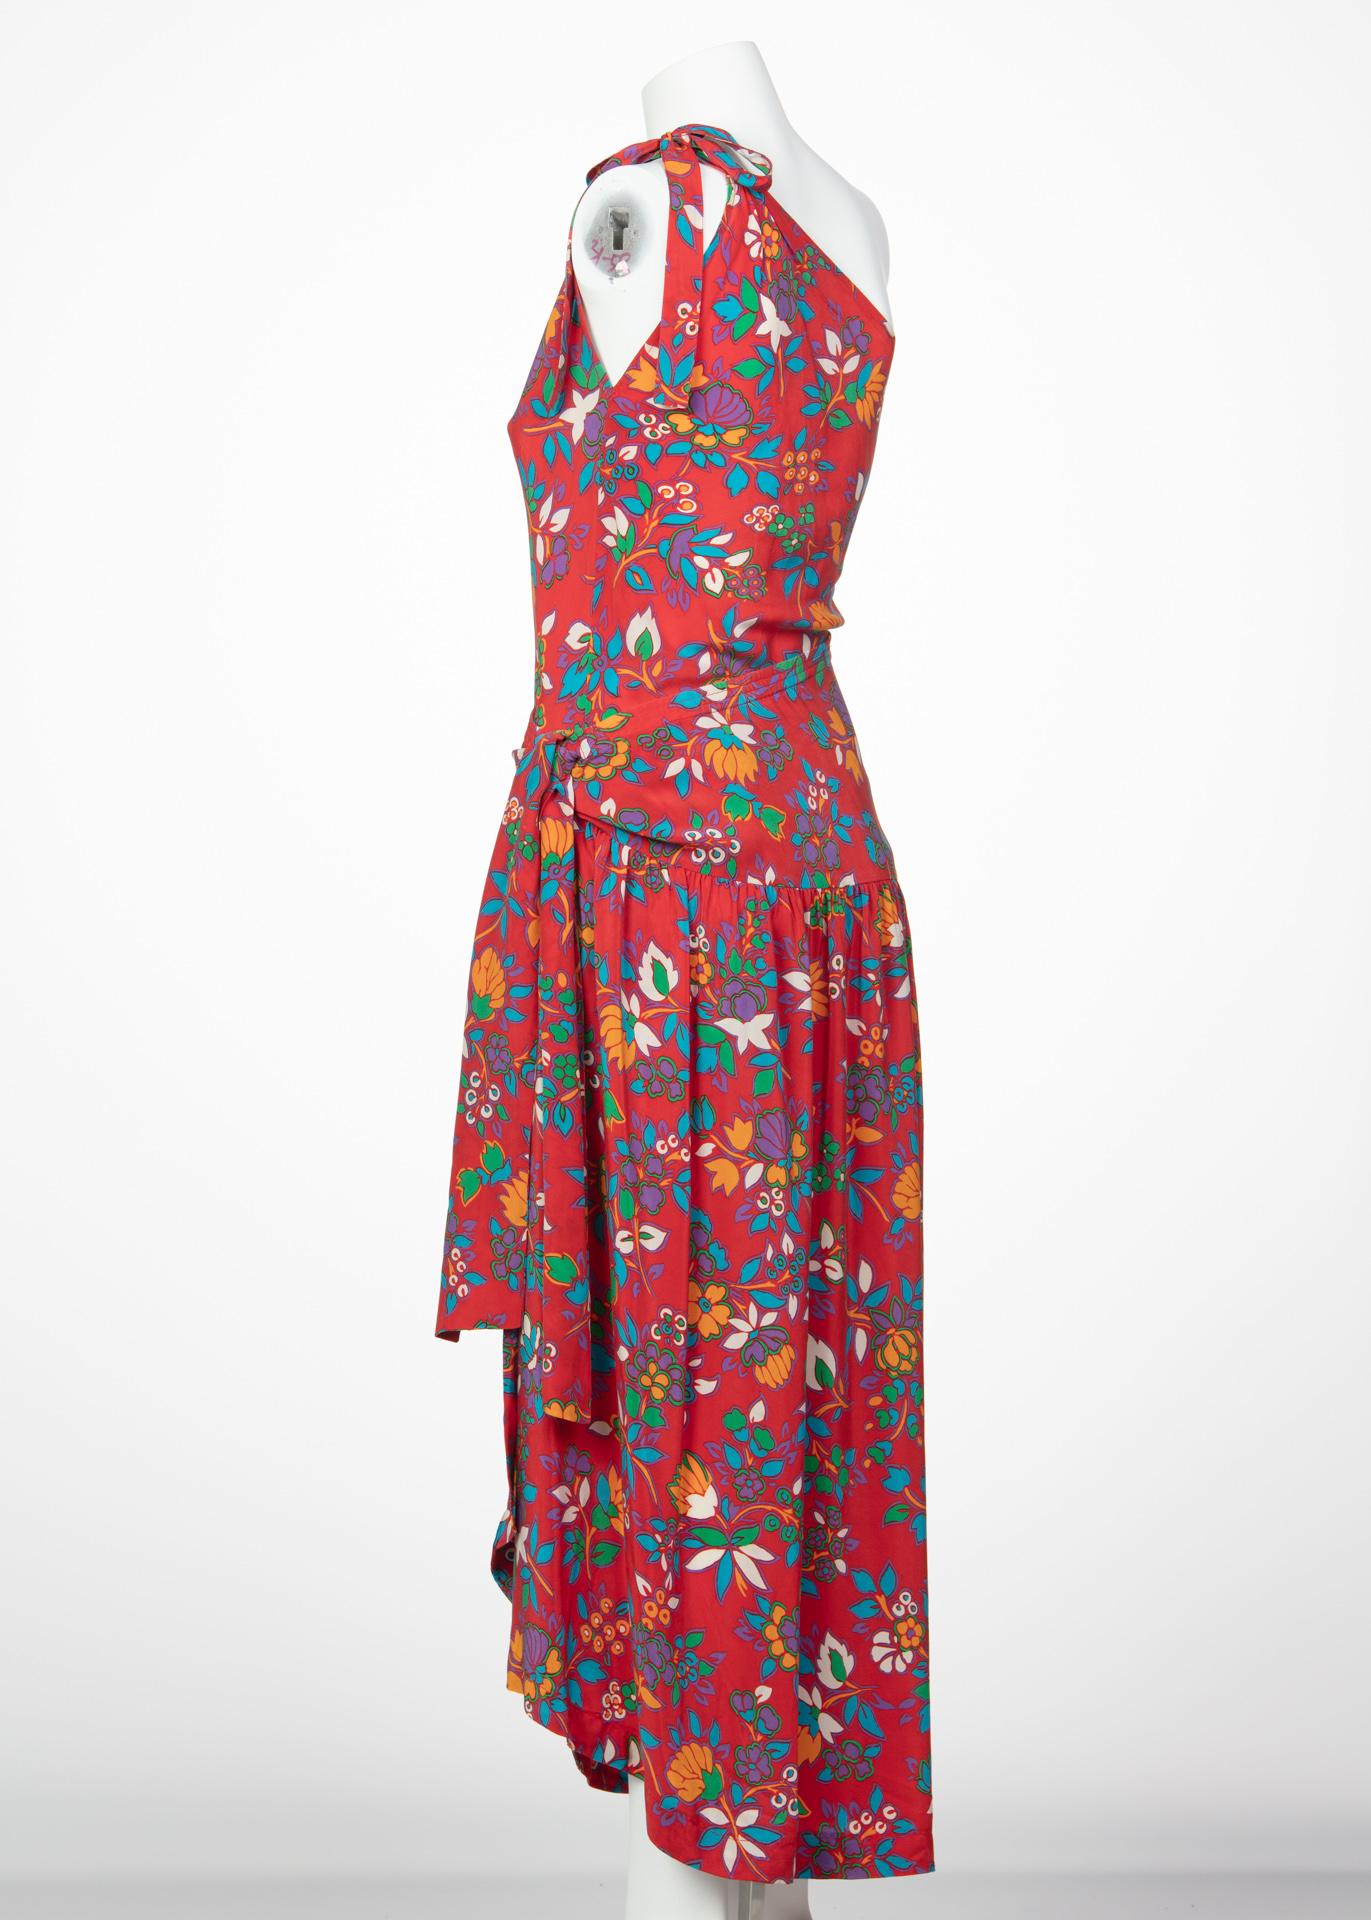 Yves Saint Laurent YSL Multicolor Floral Print Top and Skirt Set, 1980s  For Sale 4